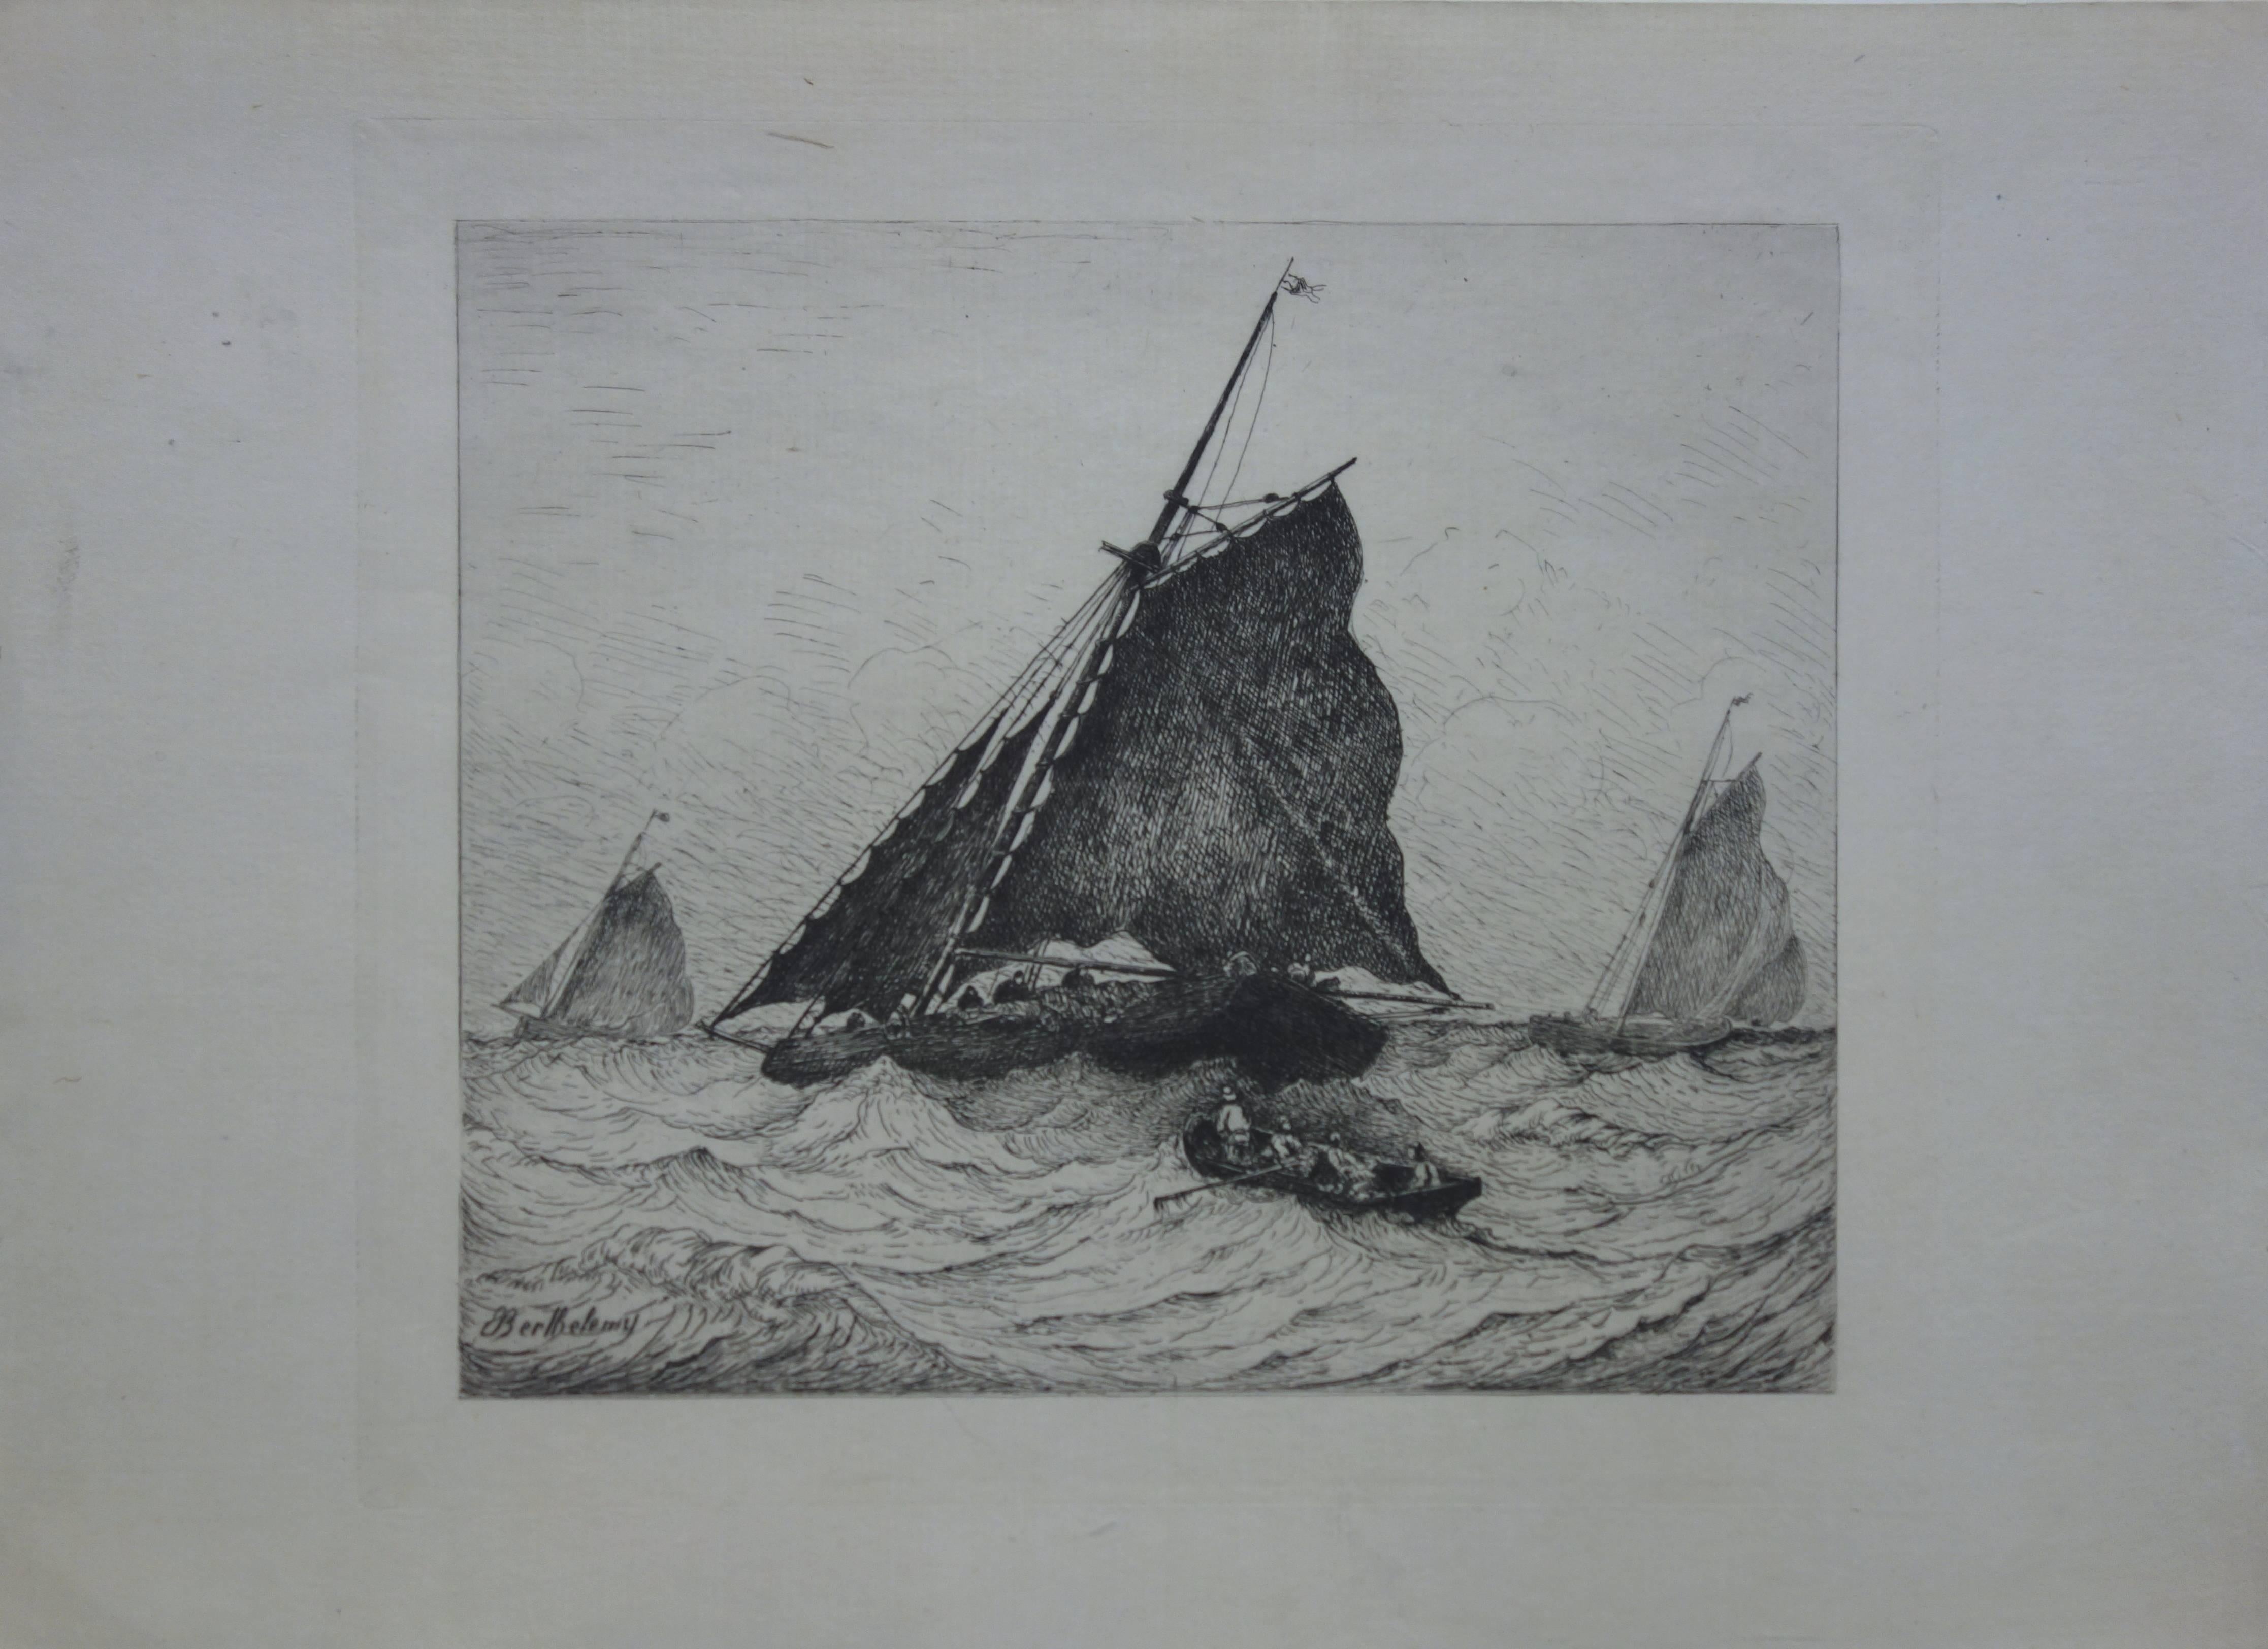 Rescue at Sea during the Storm - Original etching - Realist Print by Pierre Emile Berthelemy